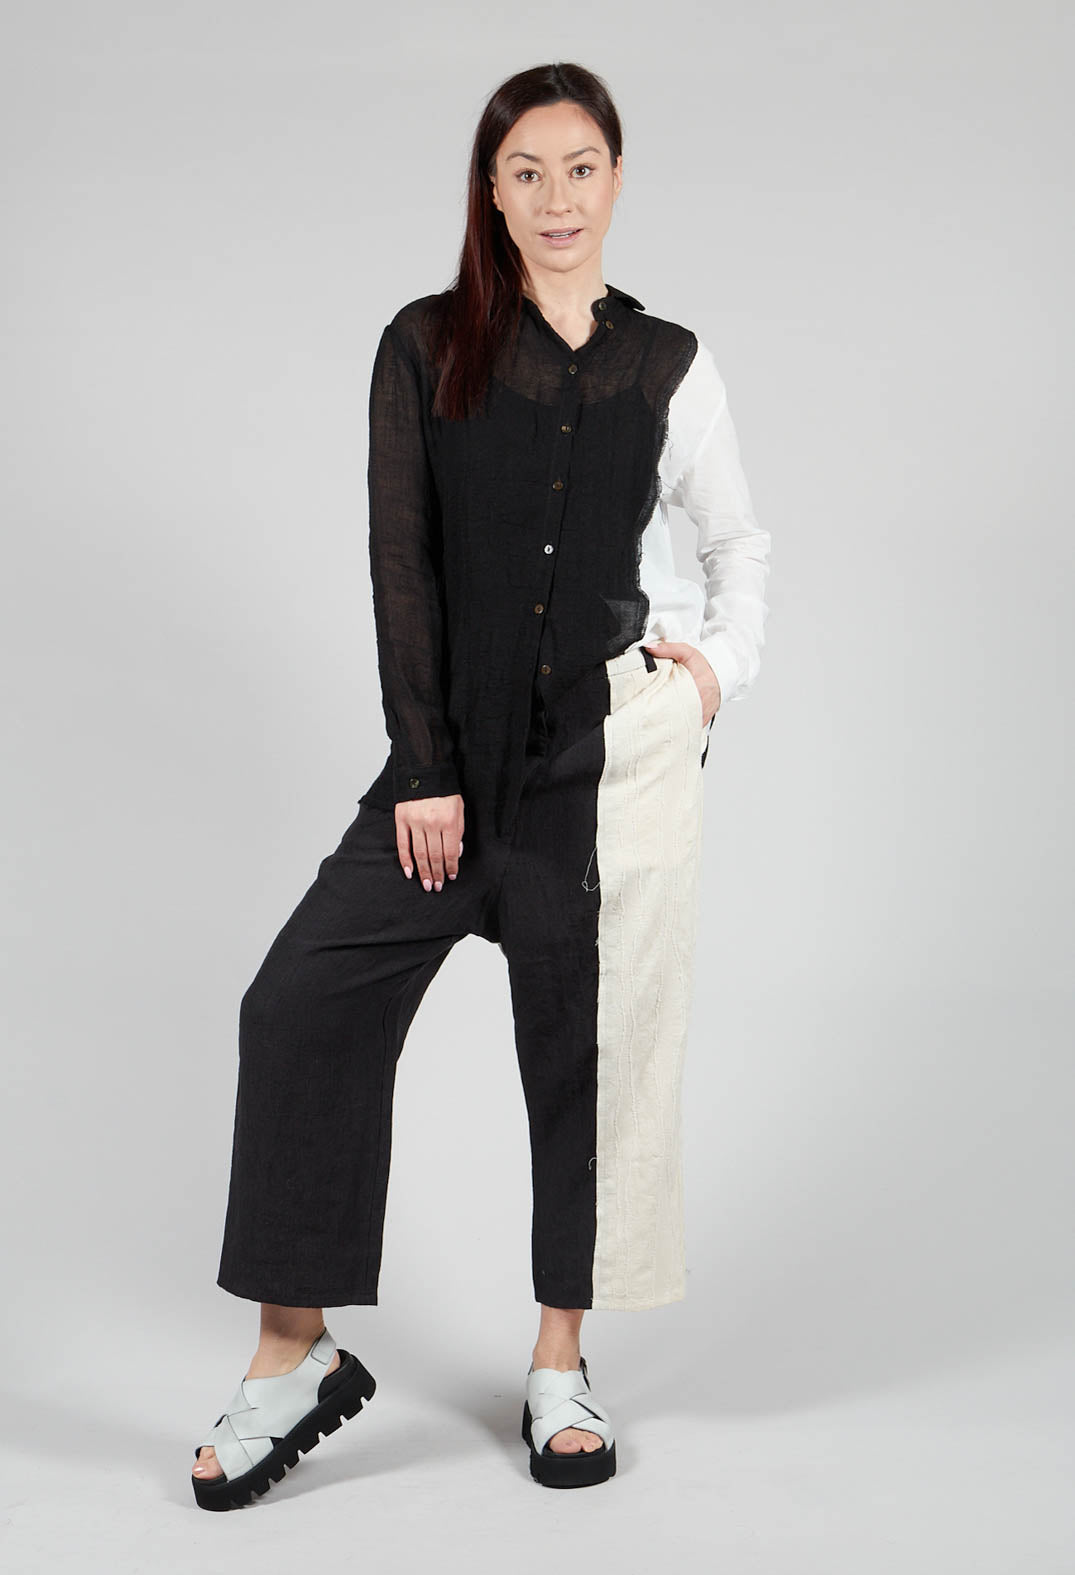 Dual Fabric Trousers in Black and White